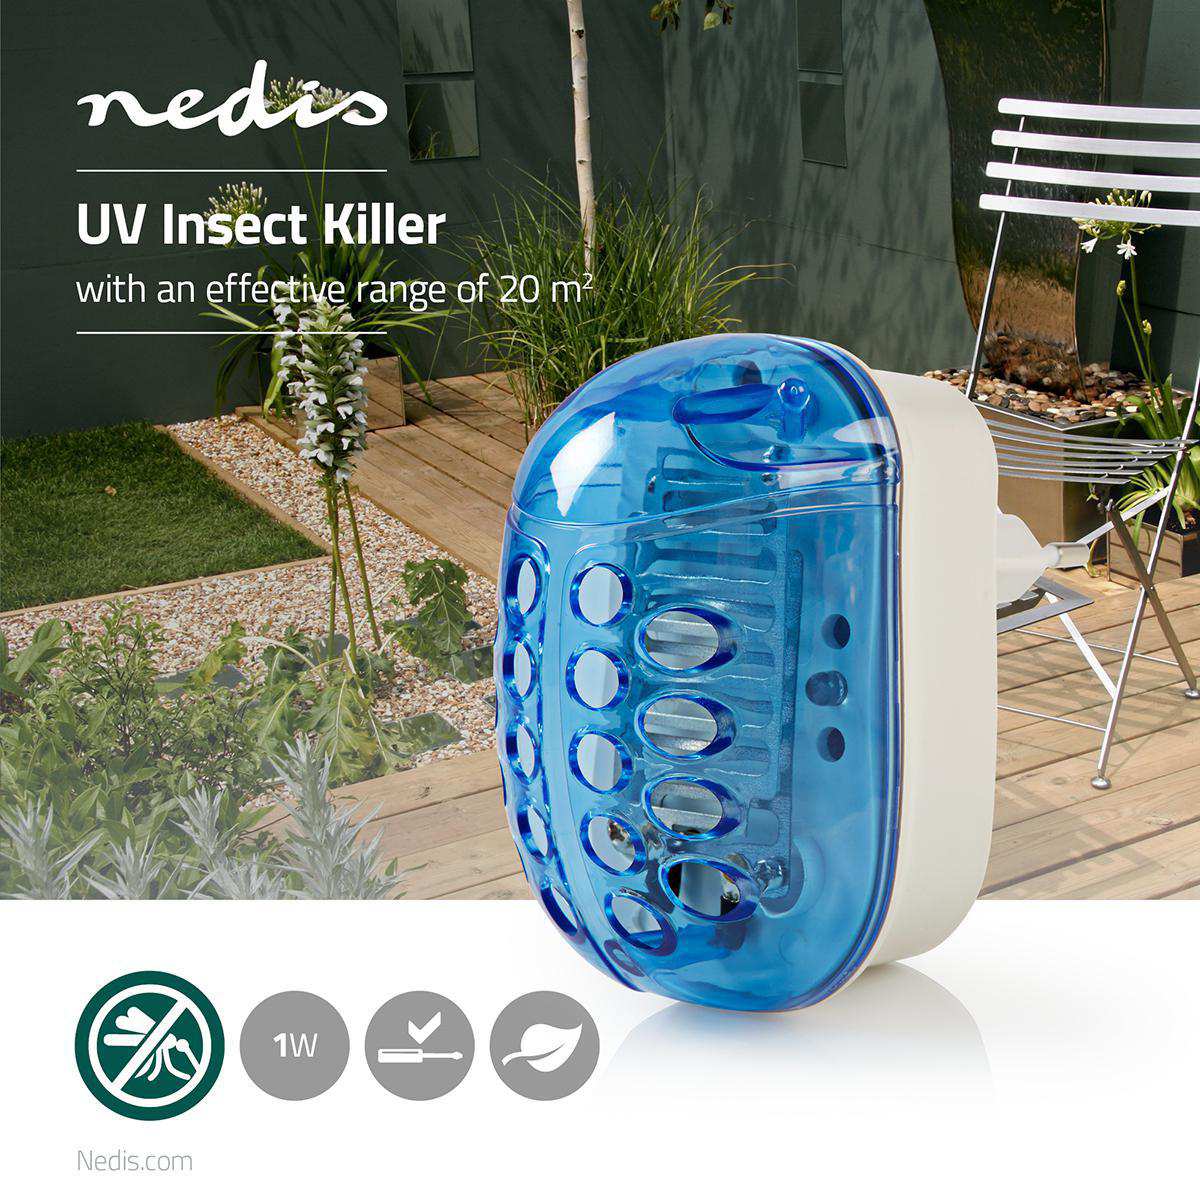 Mosquito Protection Insects Light Trap 1W Nedis